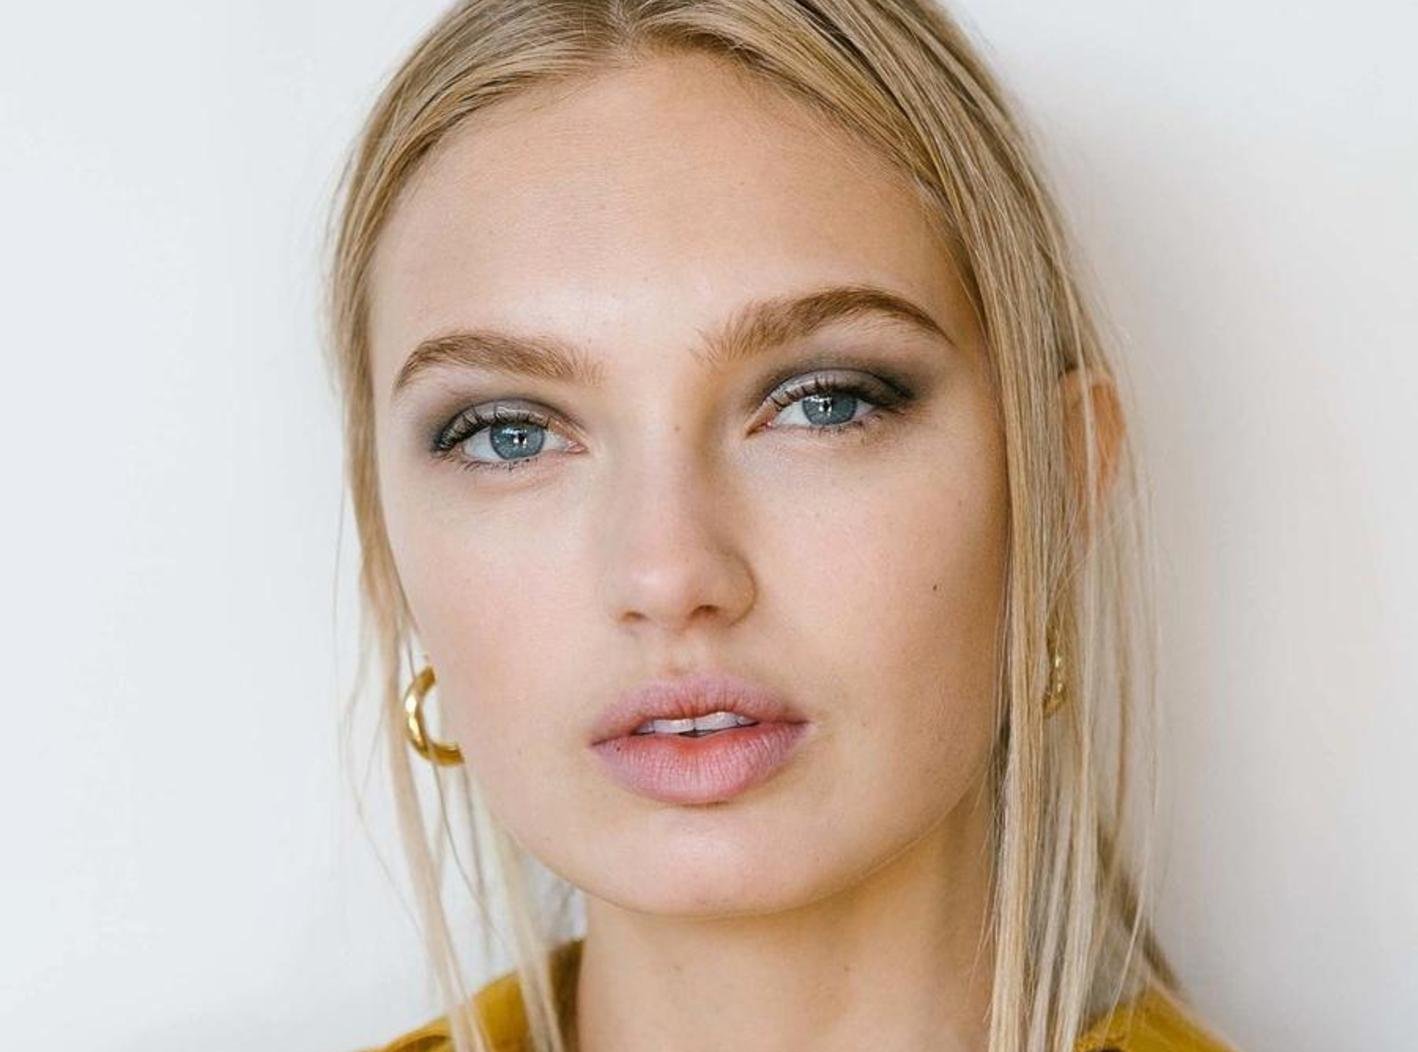 Romee Strijd (romeestrijd / 10.09.2017): "Romee Stijd backstage at Public School S/S 2018 #romeestrijd #publicschool #nyfw #ss18 #backstage #beauty #makeup #model #vsangel #fashionshow #fashion #style #fashionweek #coreytenold #vogue, Image: 349017627, License: Rights-managed, Restrictions: , Model Release: no, Credit line: Profimedia, Face To Face A